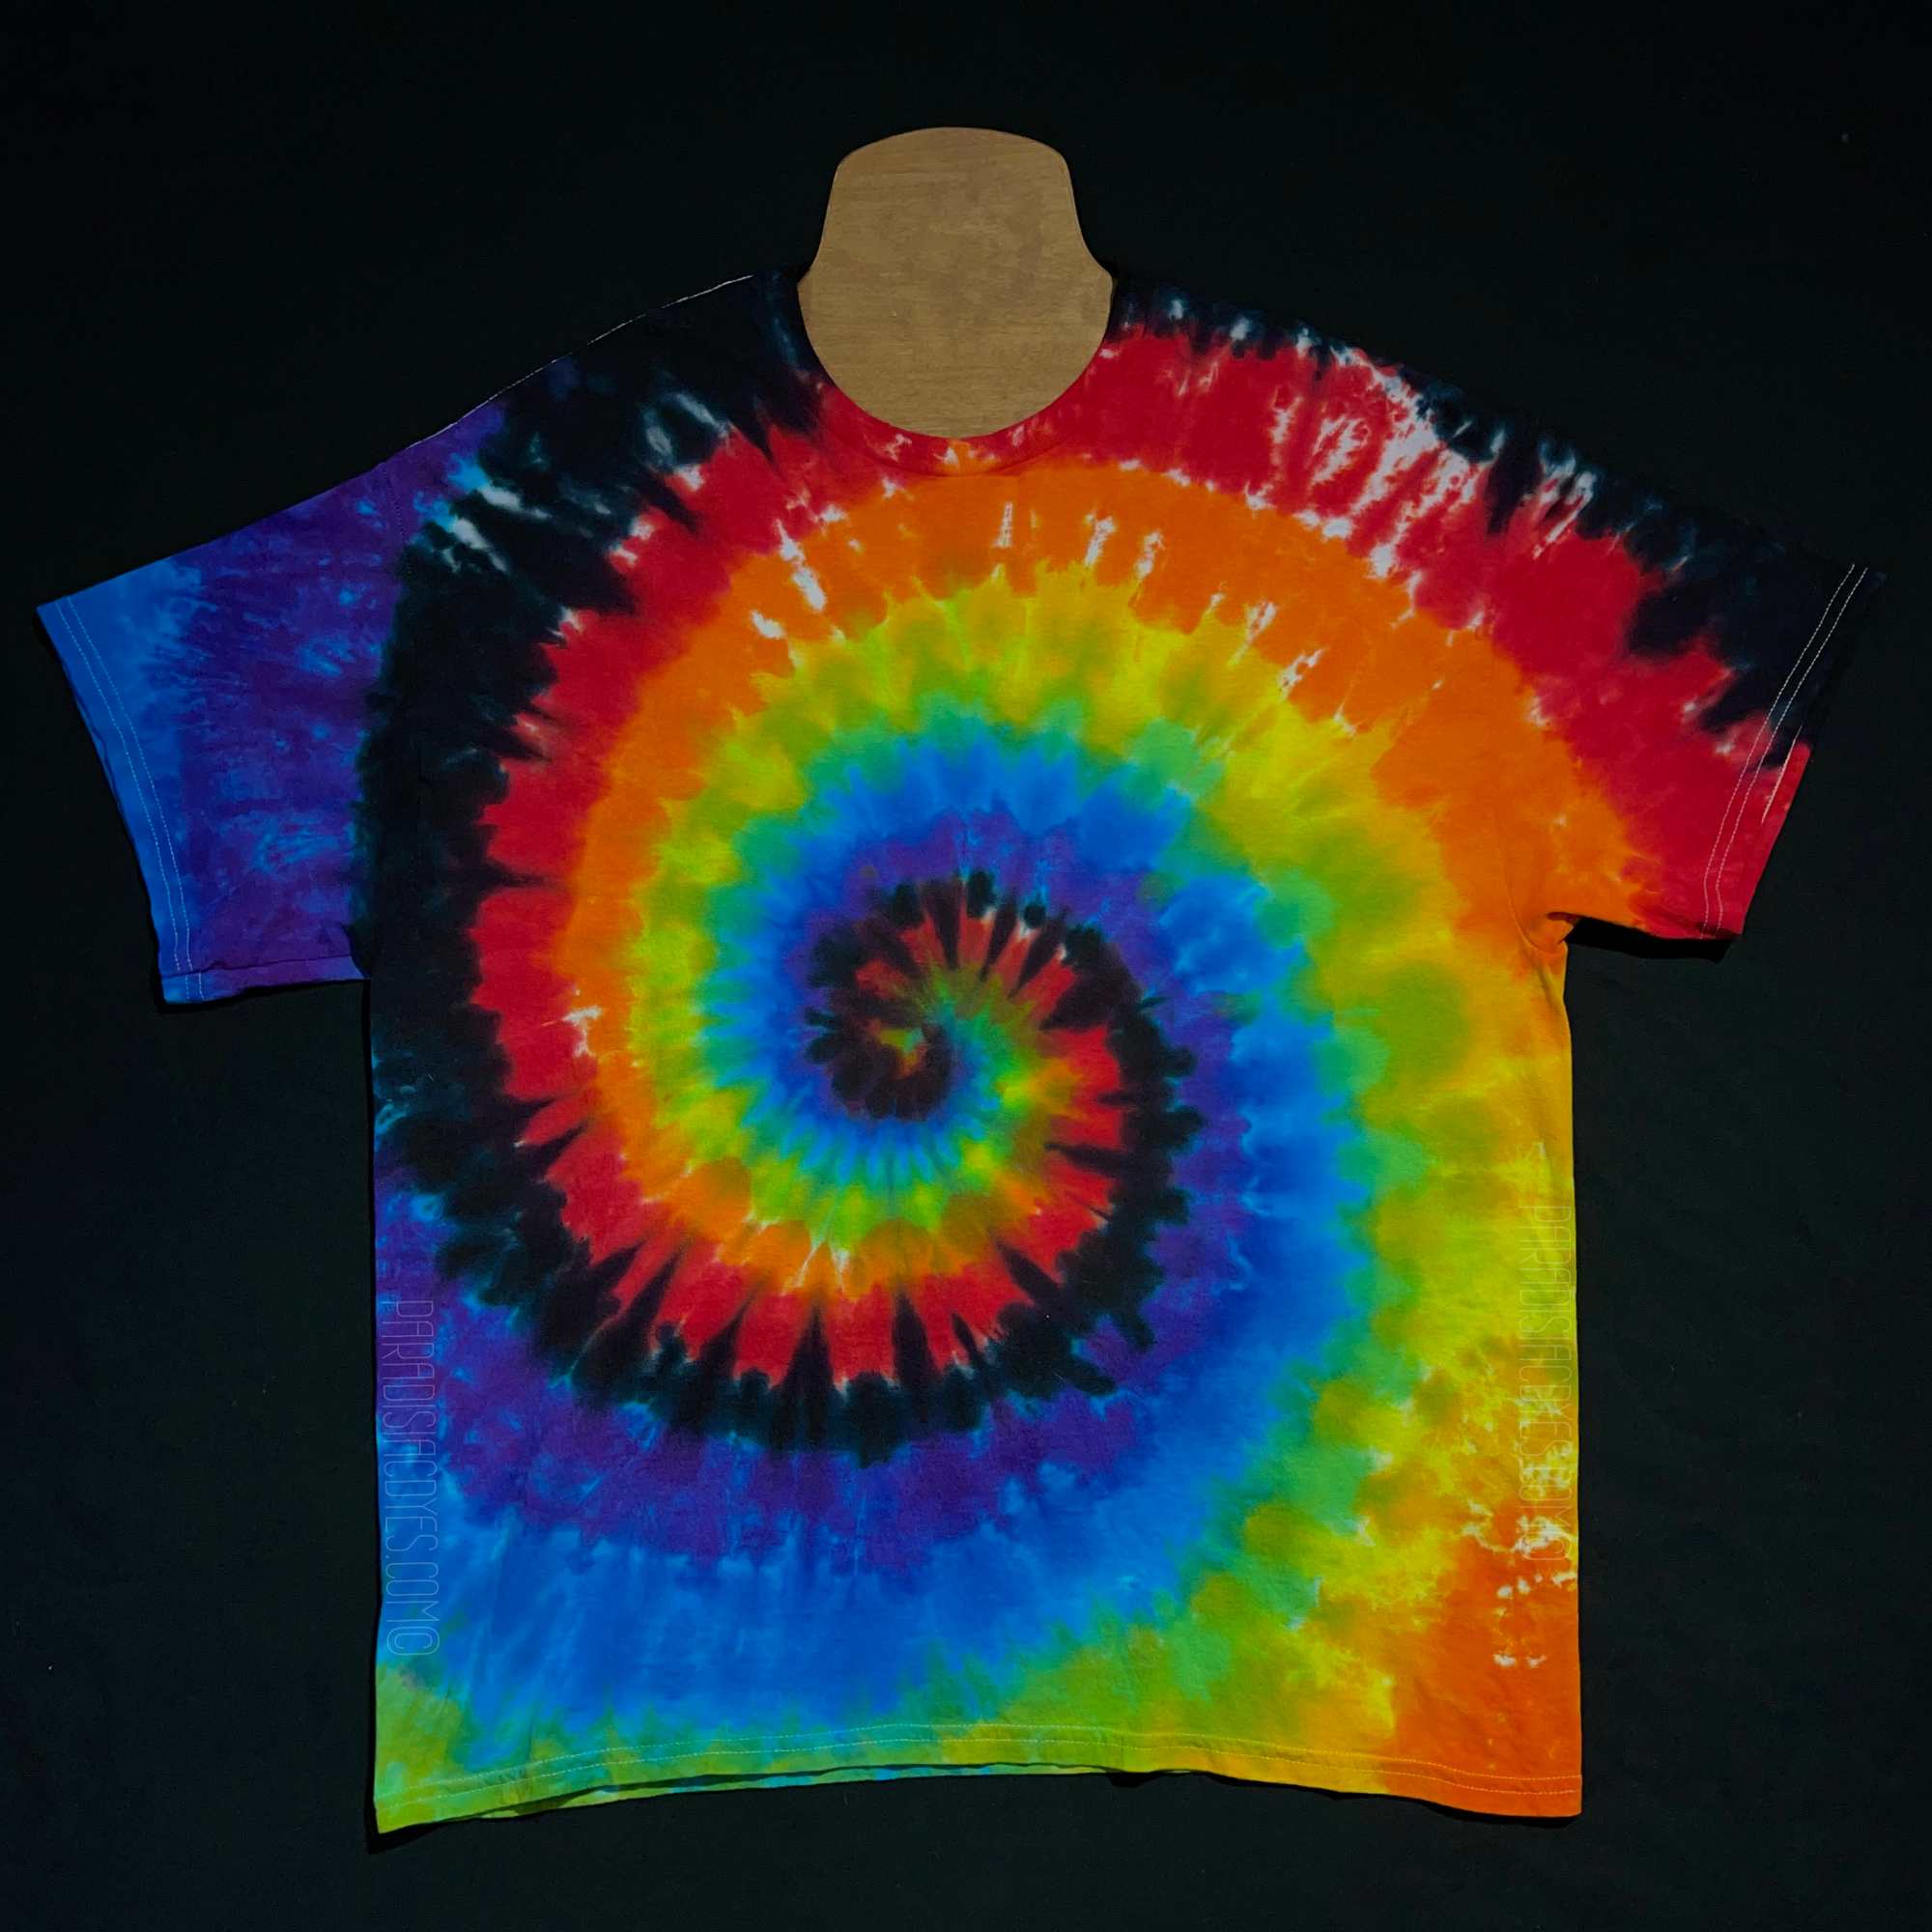 An example of a finished, one-of-a-kind, hand-dyed when ordered rainbow tie dye t-shirt, featuring: red, orange, yellow, green, blue, purple & black in a spiral design